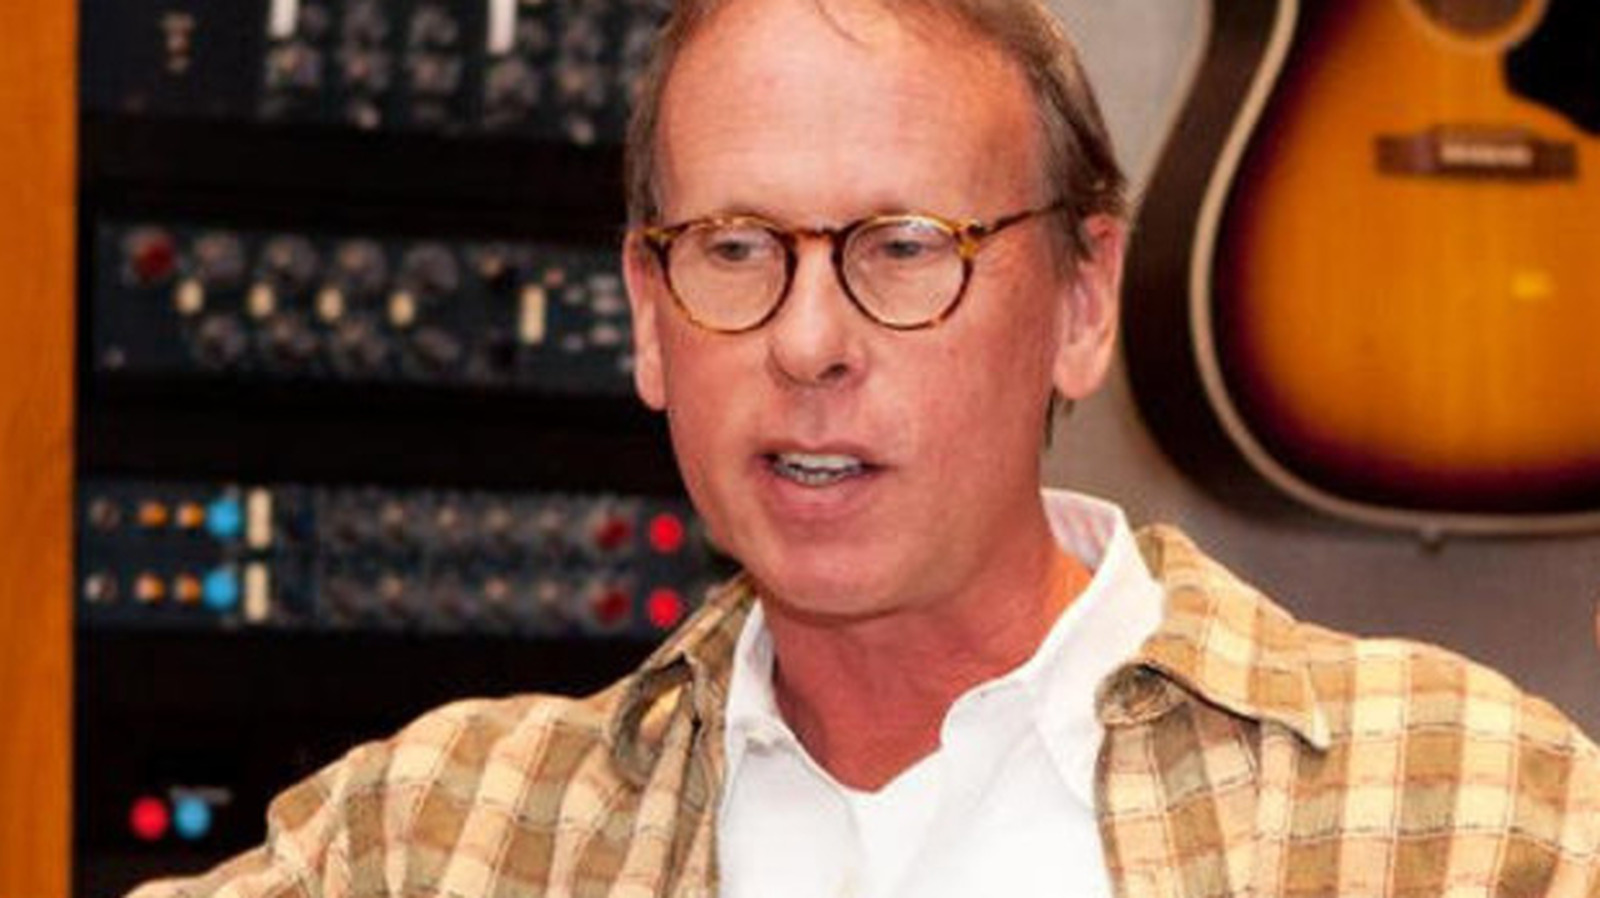 Wrestling Music Composer Jim Johnston Approached AEW About Doing Its Themes